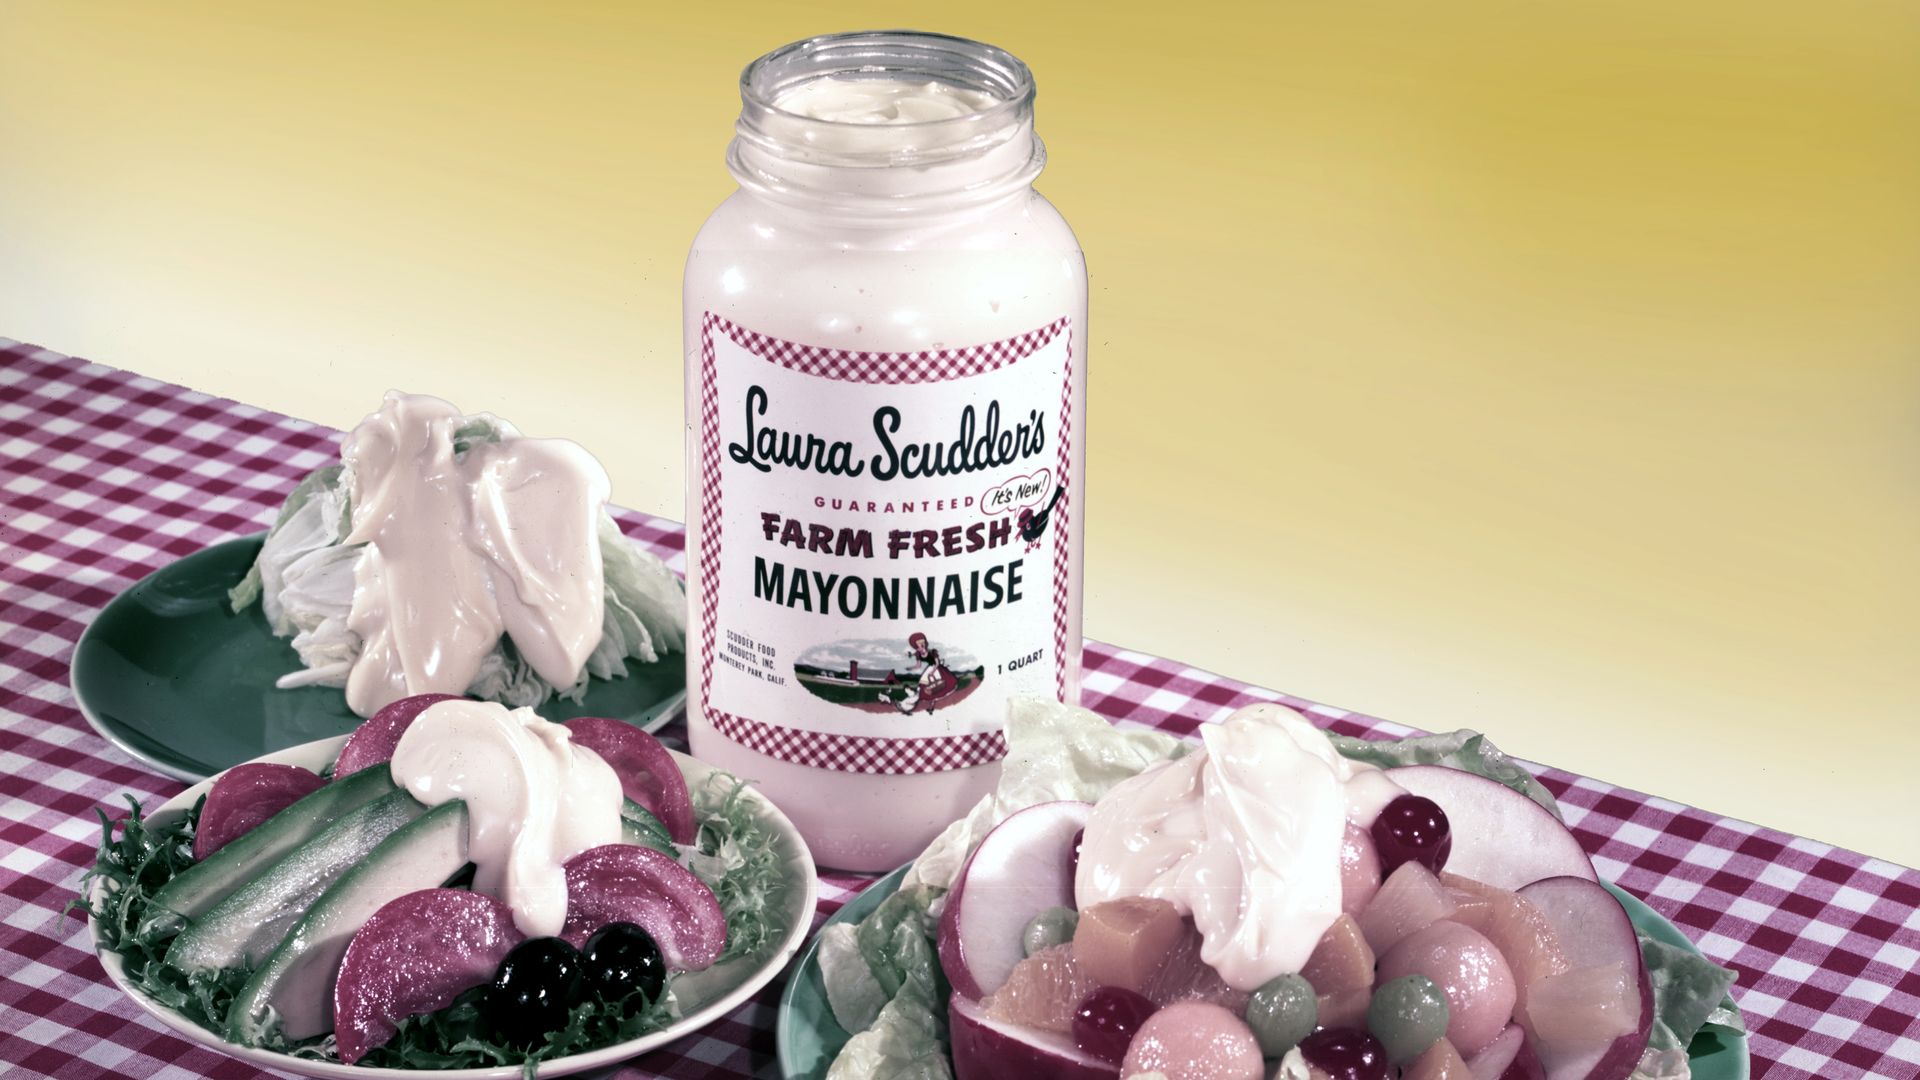 An open jar of mayonnaise next to plates of veggies on a gingham tablecloth